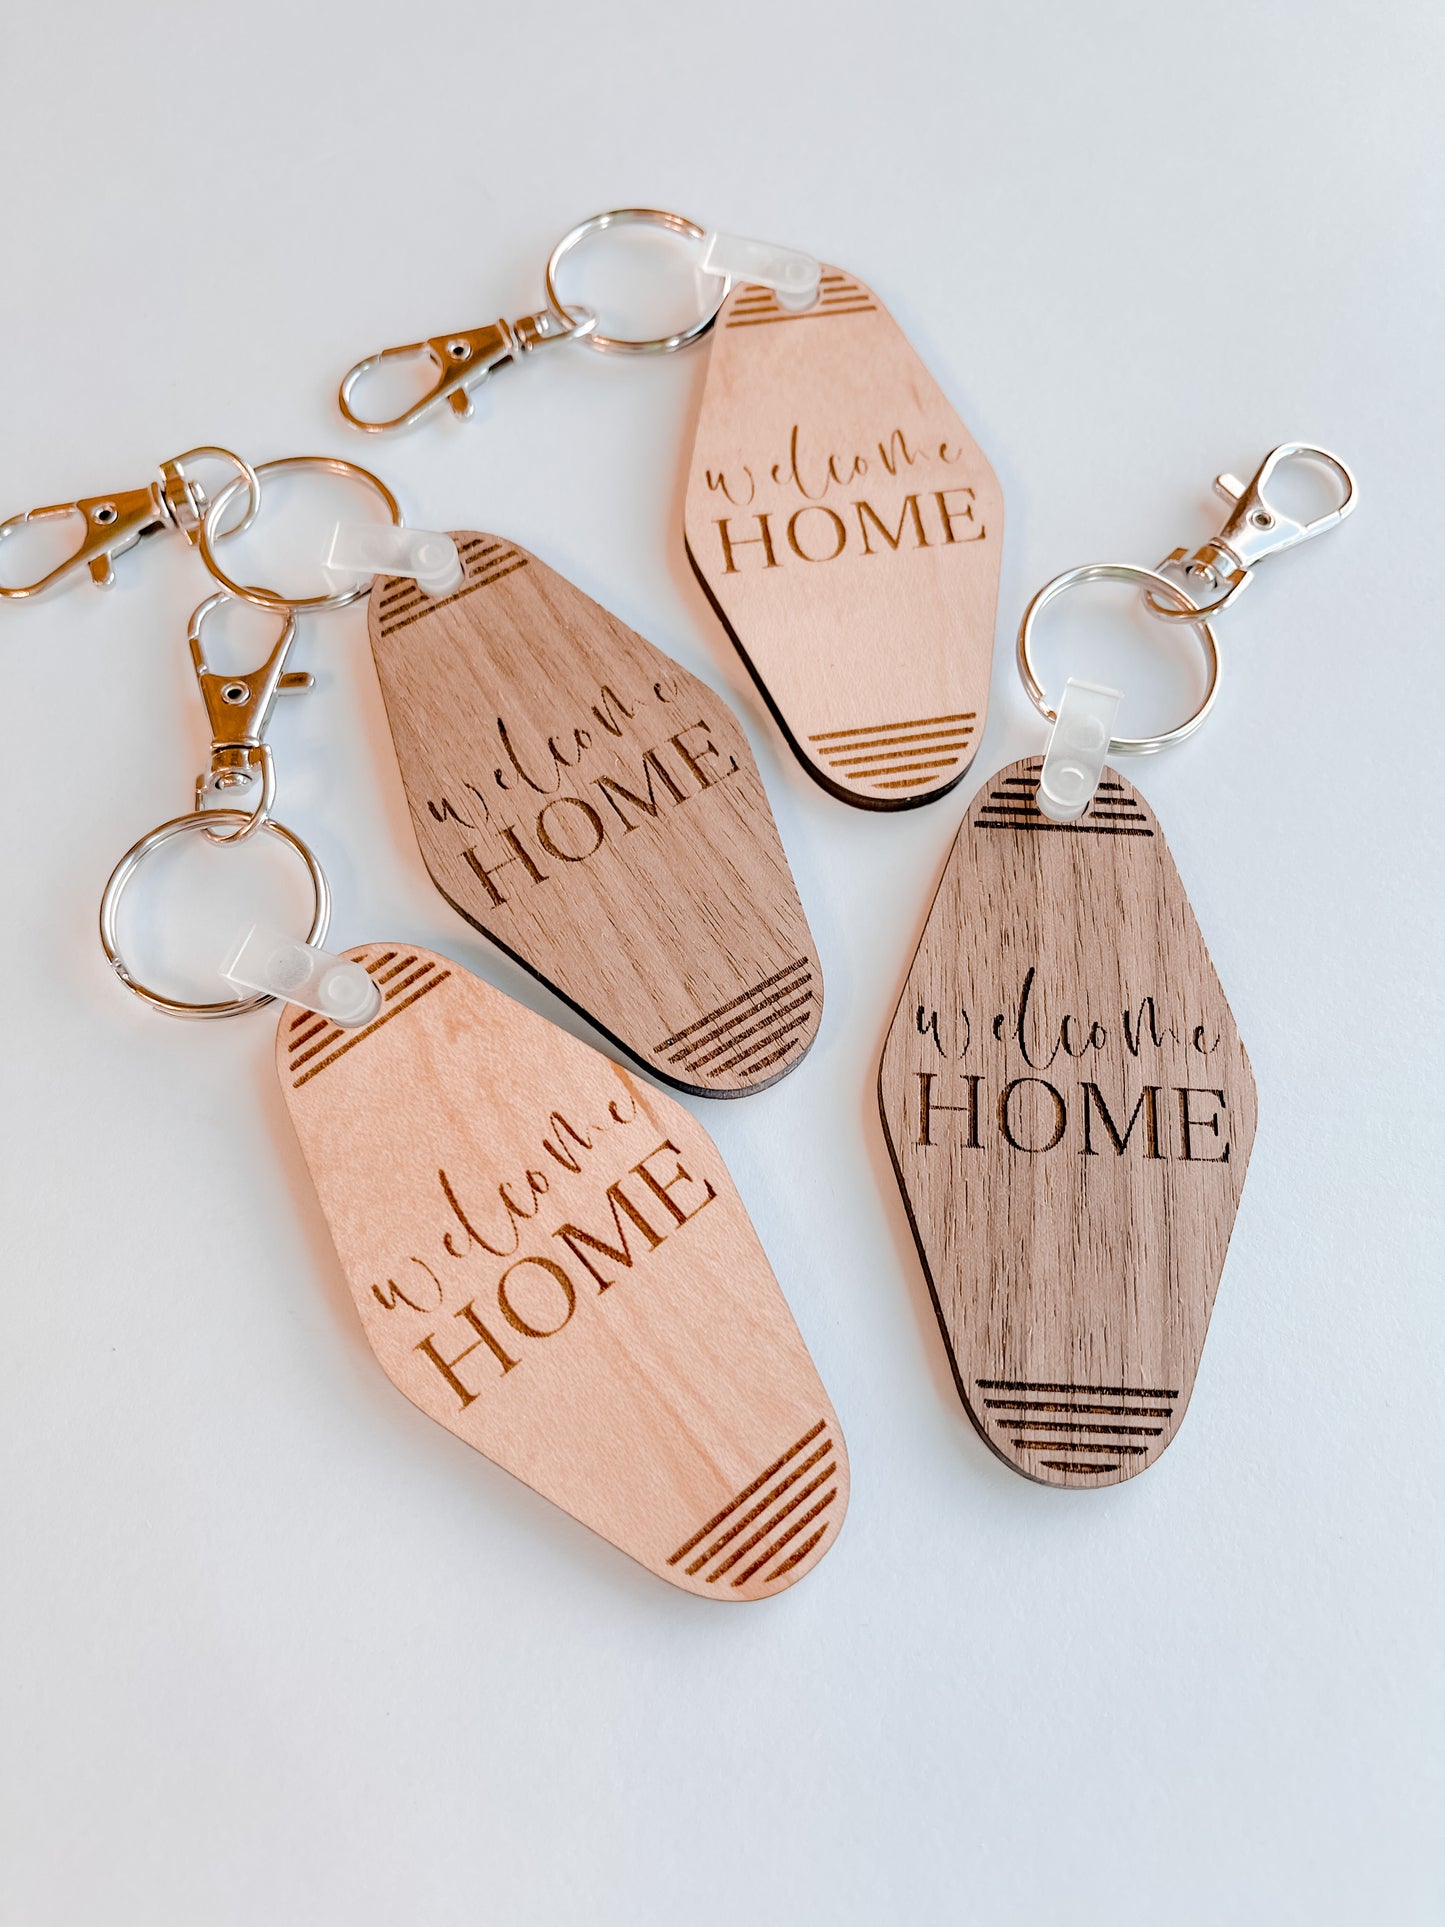 Welcome Home Motel Keychains